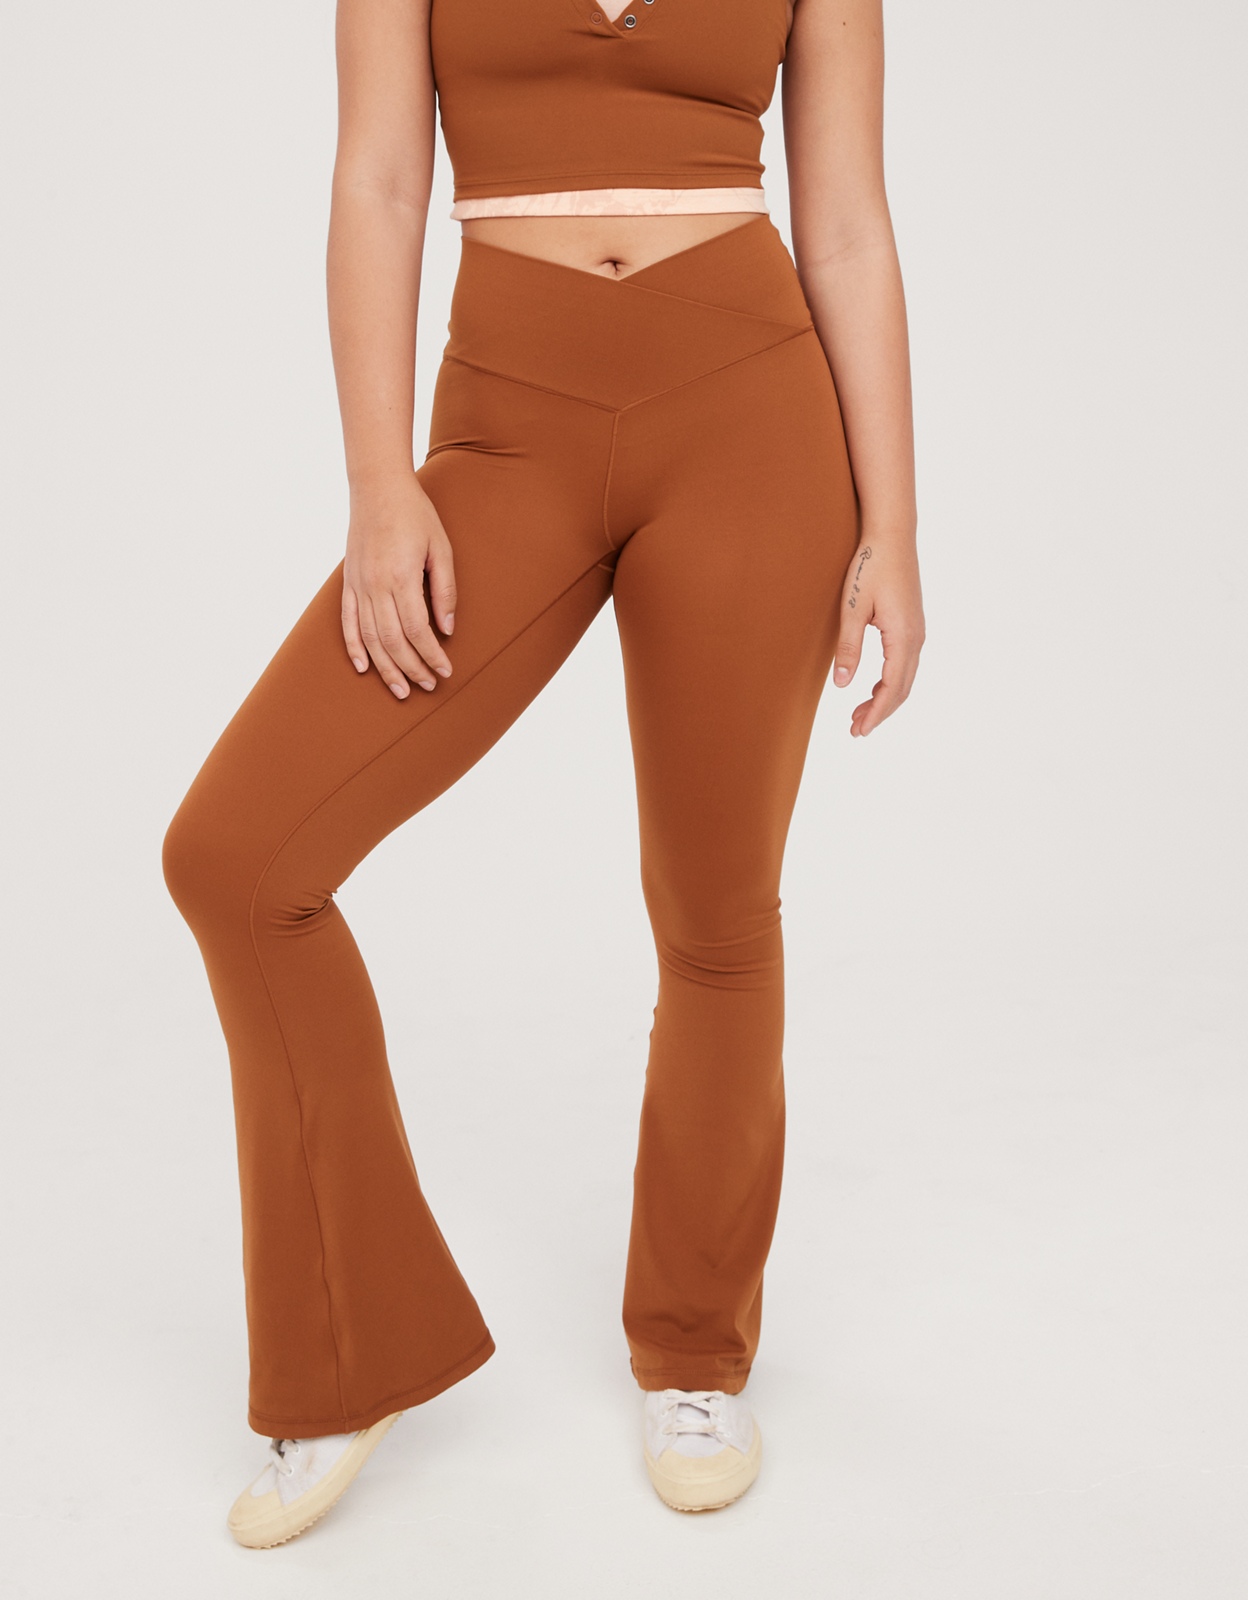 The  crossover flare leggings are EXACTLY the same is Aerie's! T